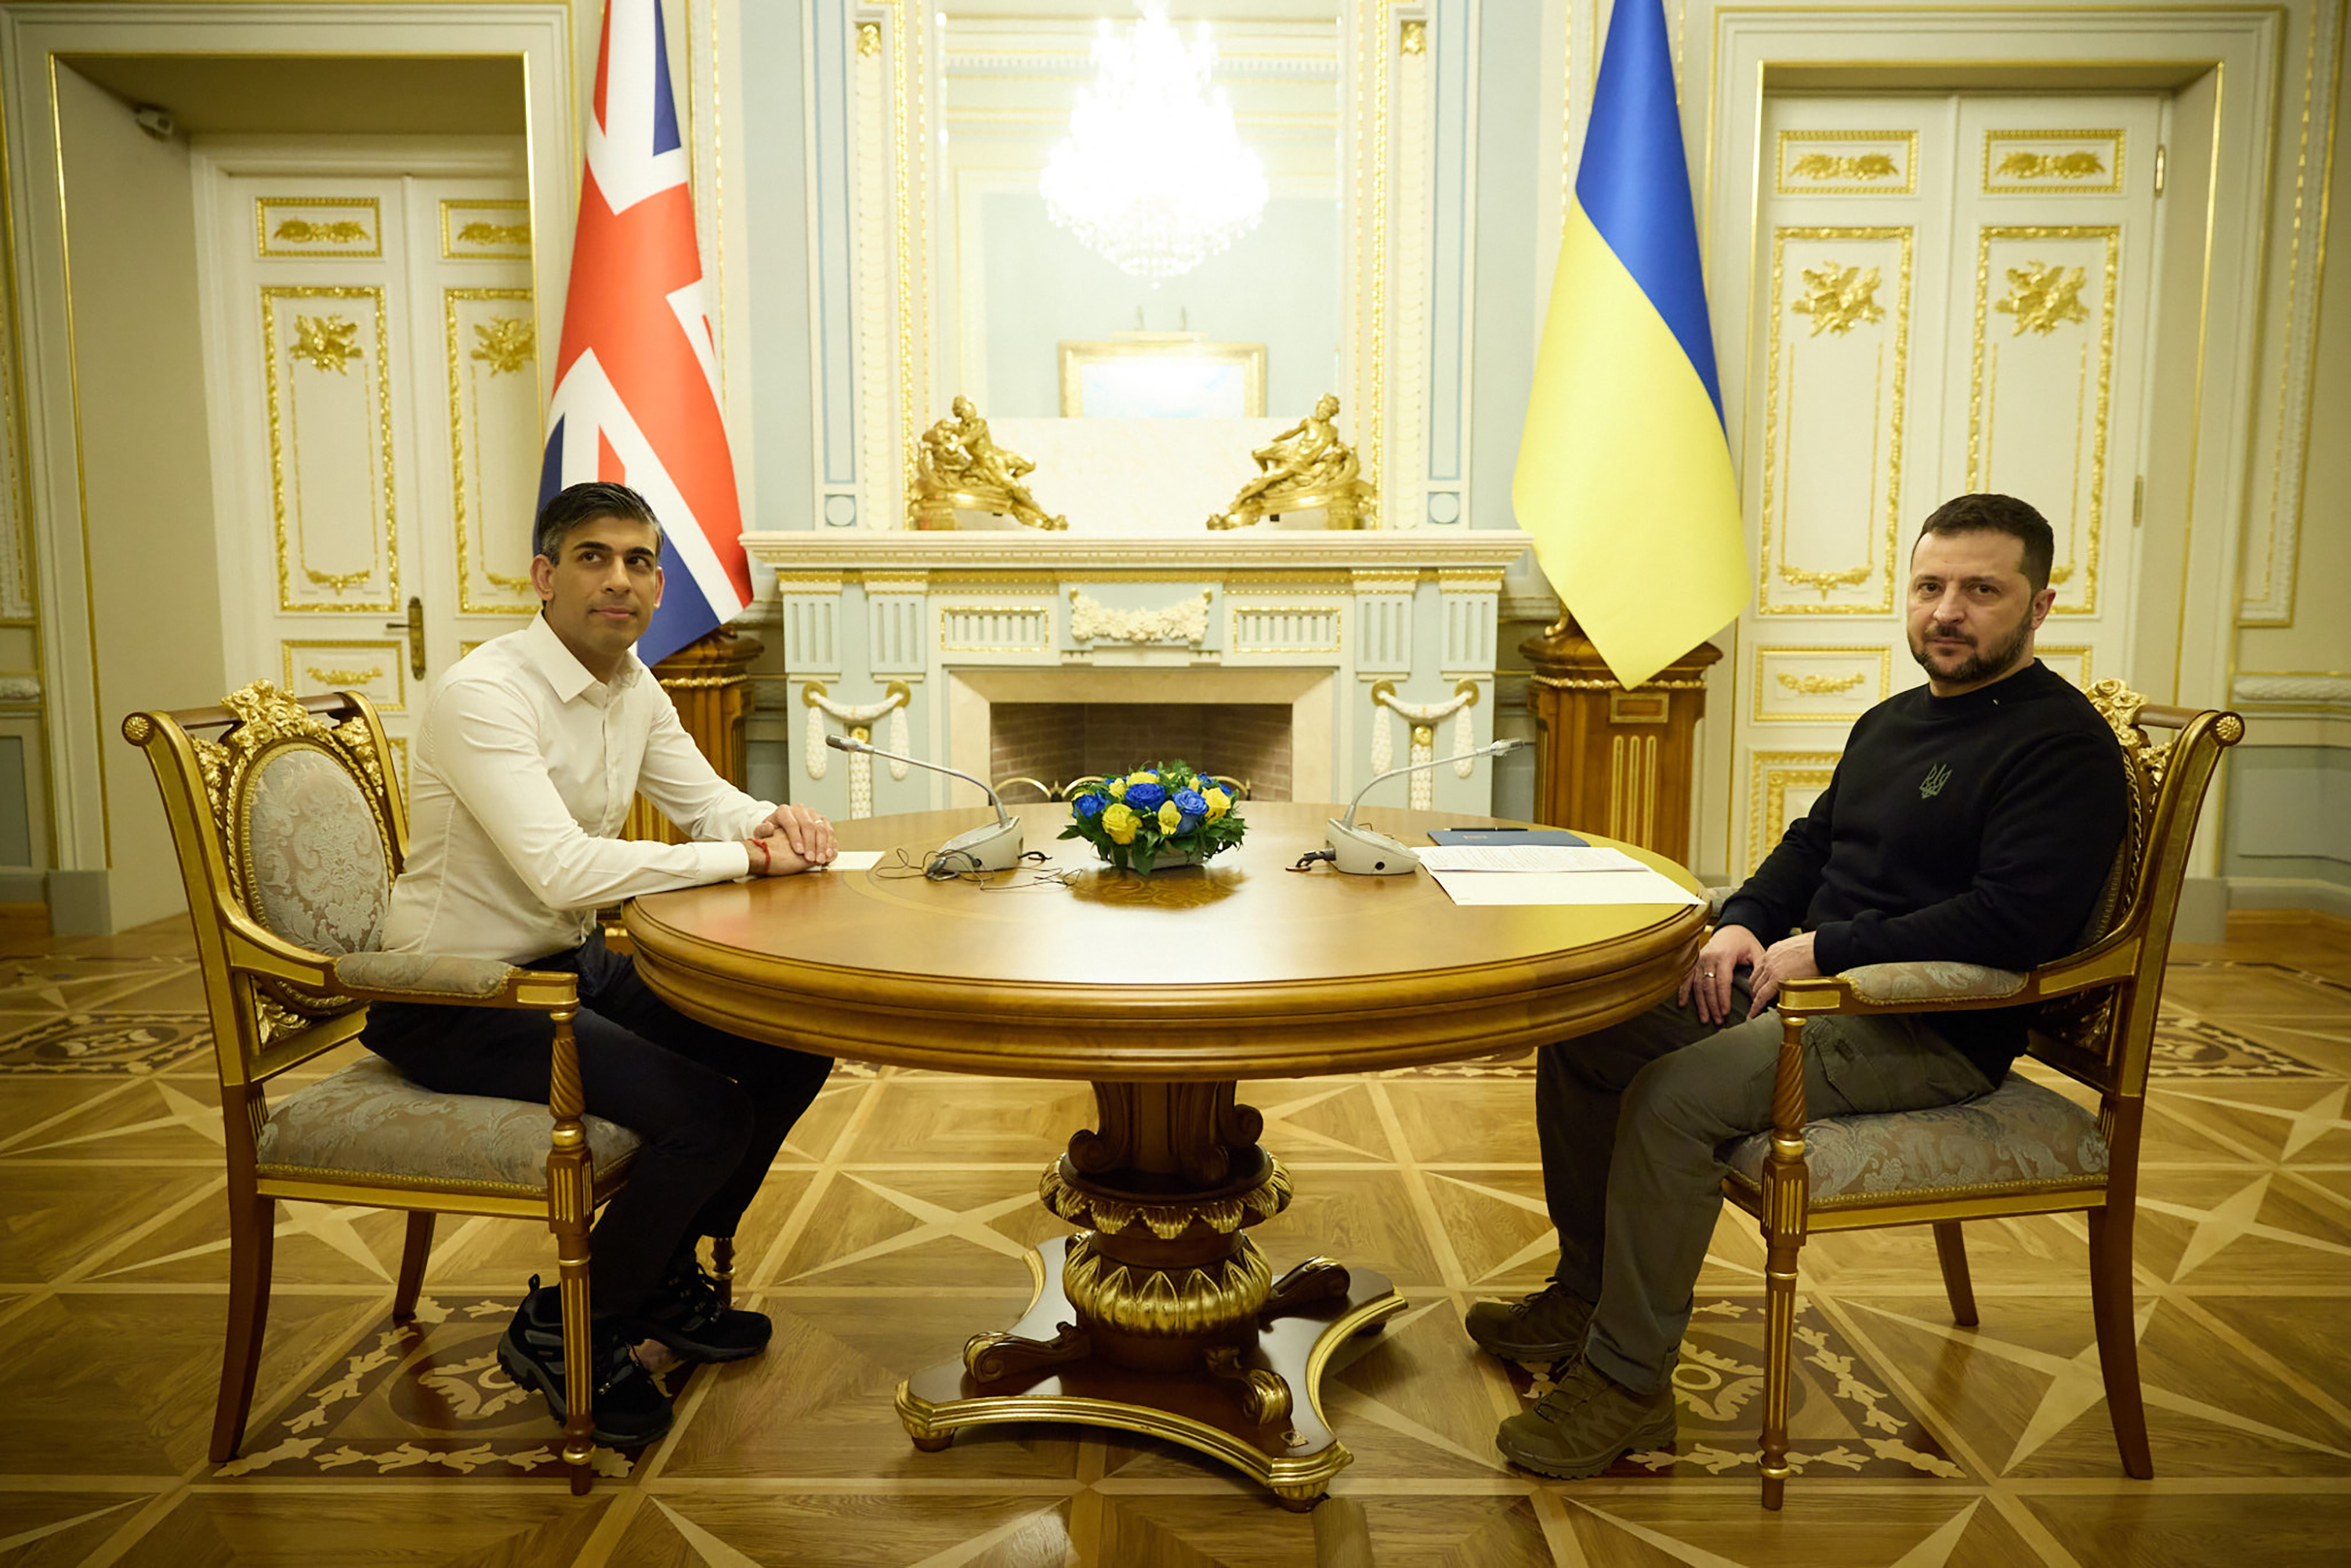 British Prime Minister Rishi Sunak (L) and Ukrainian President Volodymyr Zelensky (R) hold bilateral talks as UK premier unveils $3.1B military aid package for Ukraine amid their meeting in Kyiv, Ukraine, on January 12.